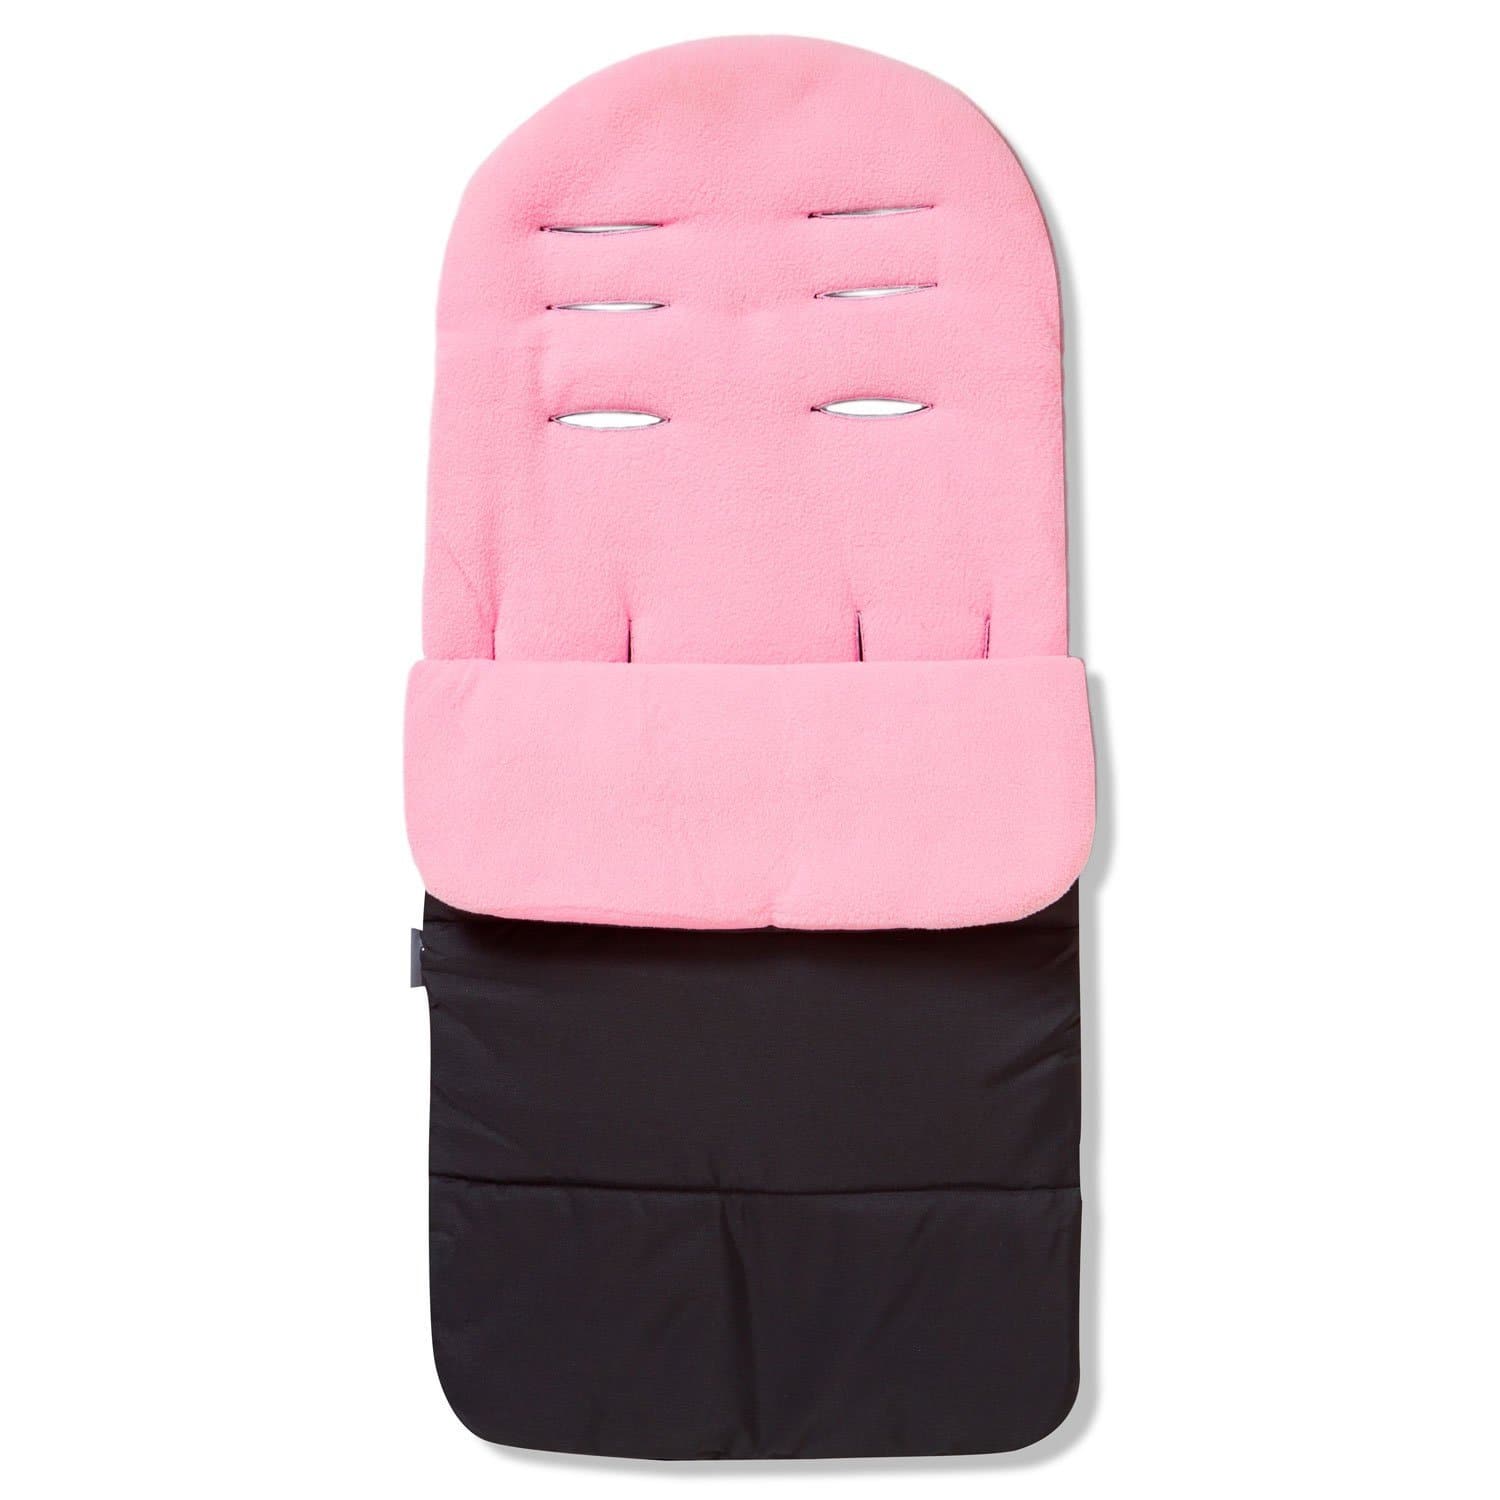 Premium Footmuff / Cosy Toes Compatible with Inglesina - Candy Pink / Fits All Models | For Your Little One